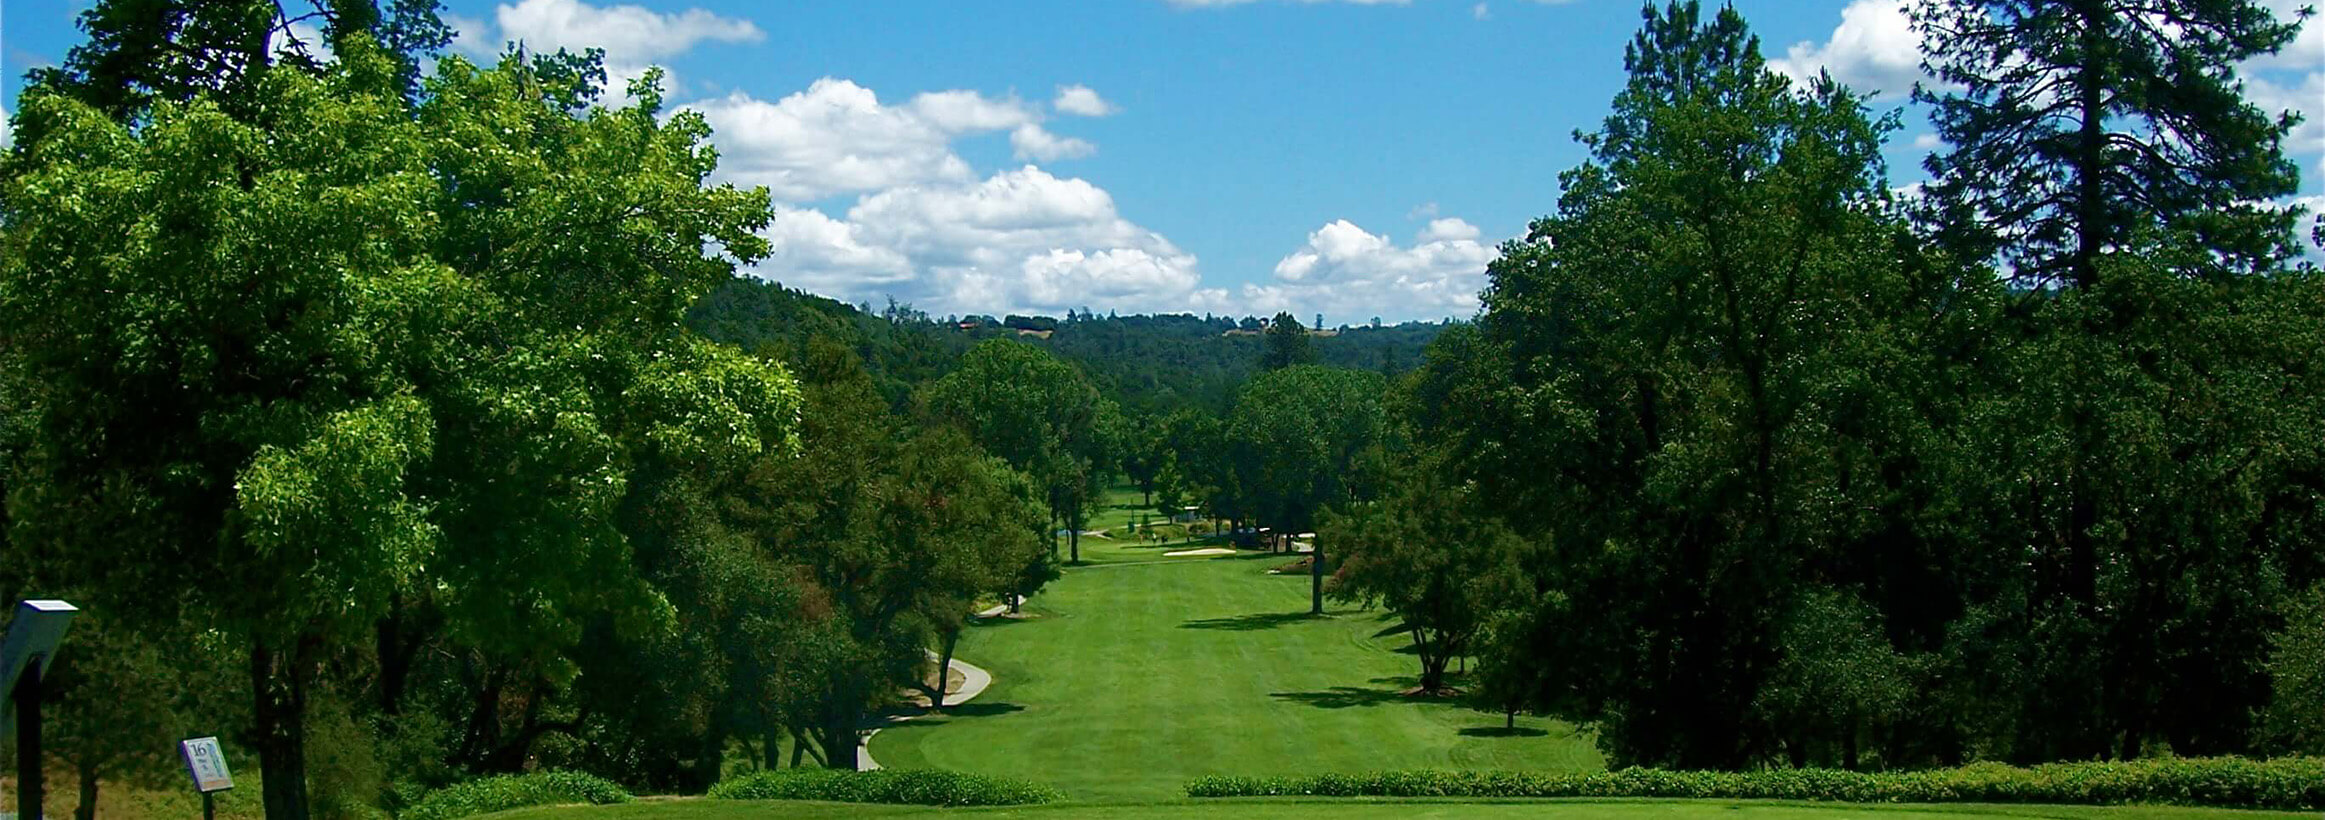 view of fairway from the tee